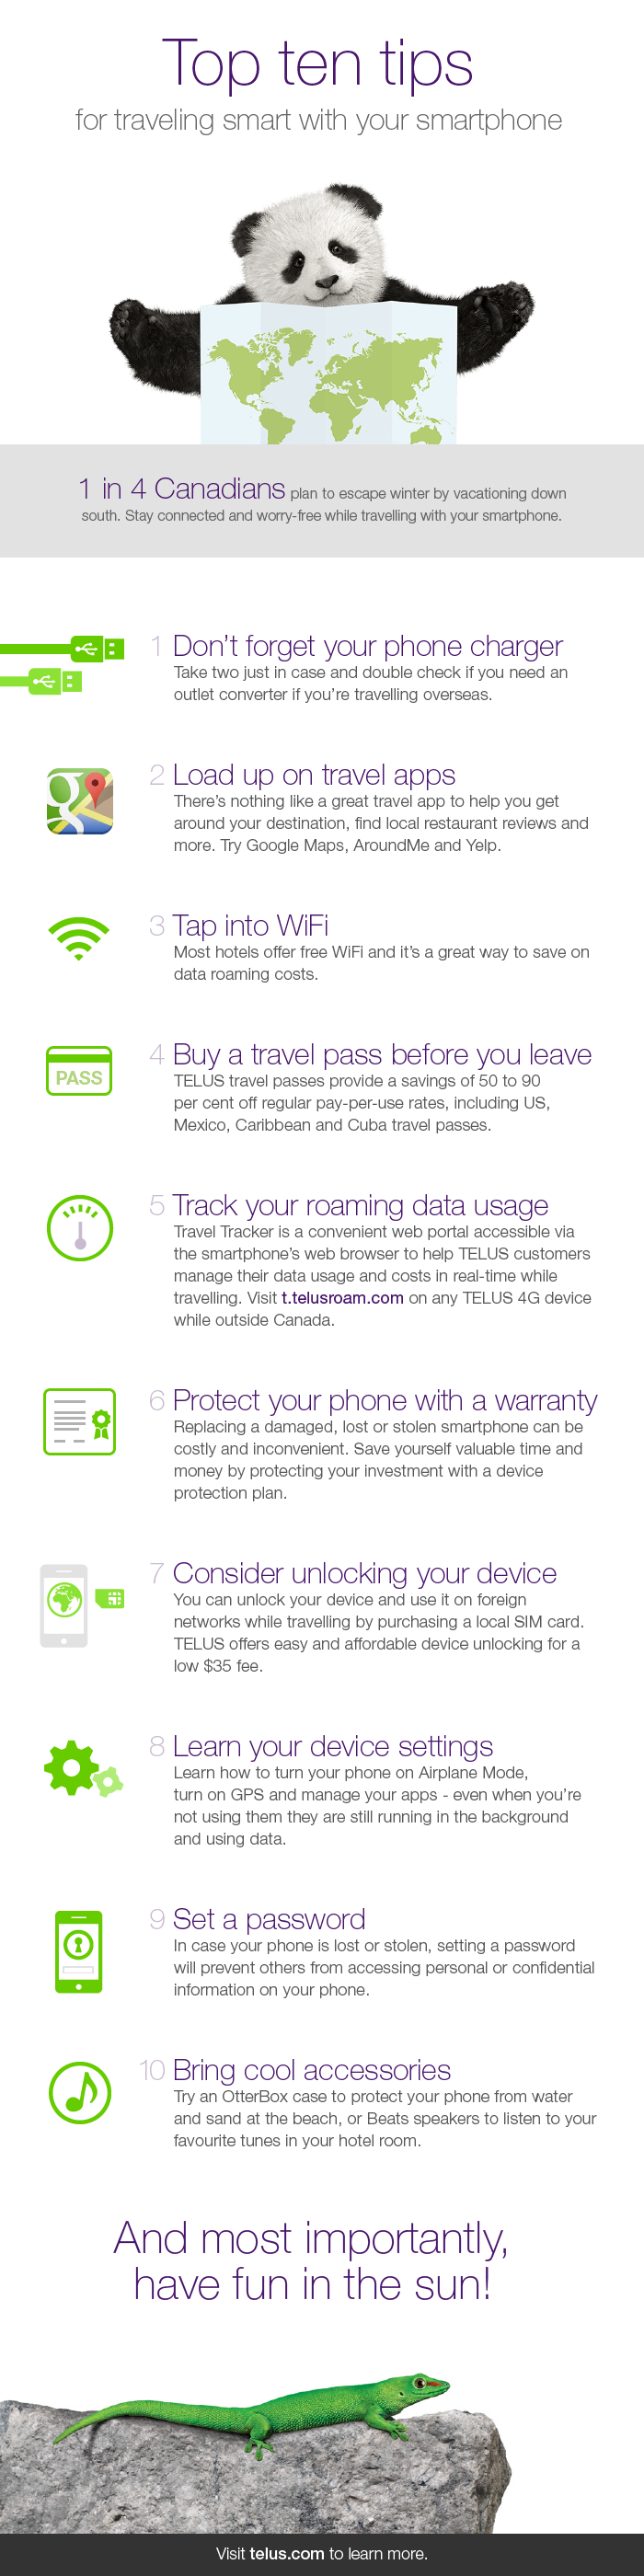 smartphone travel tips infographic